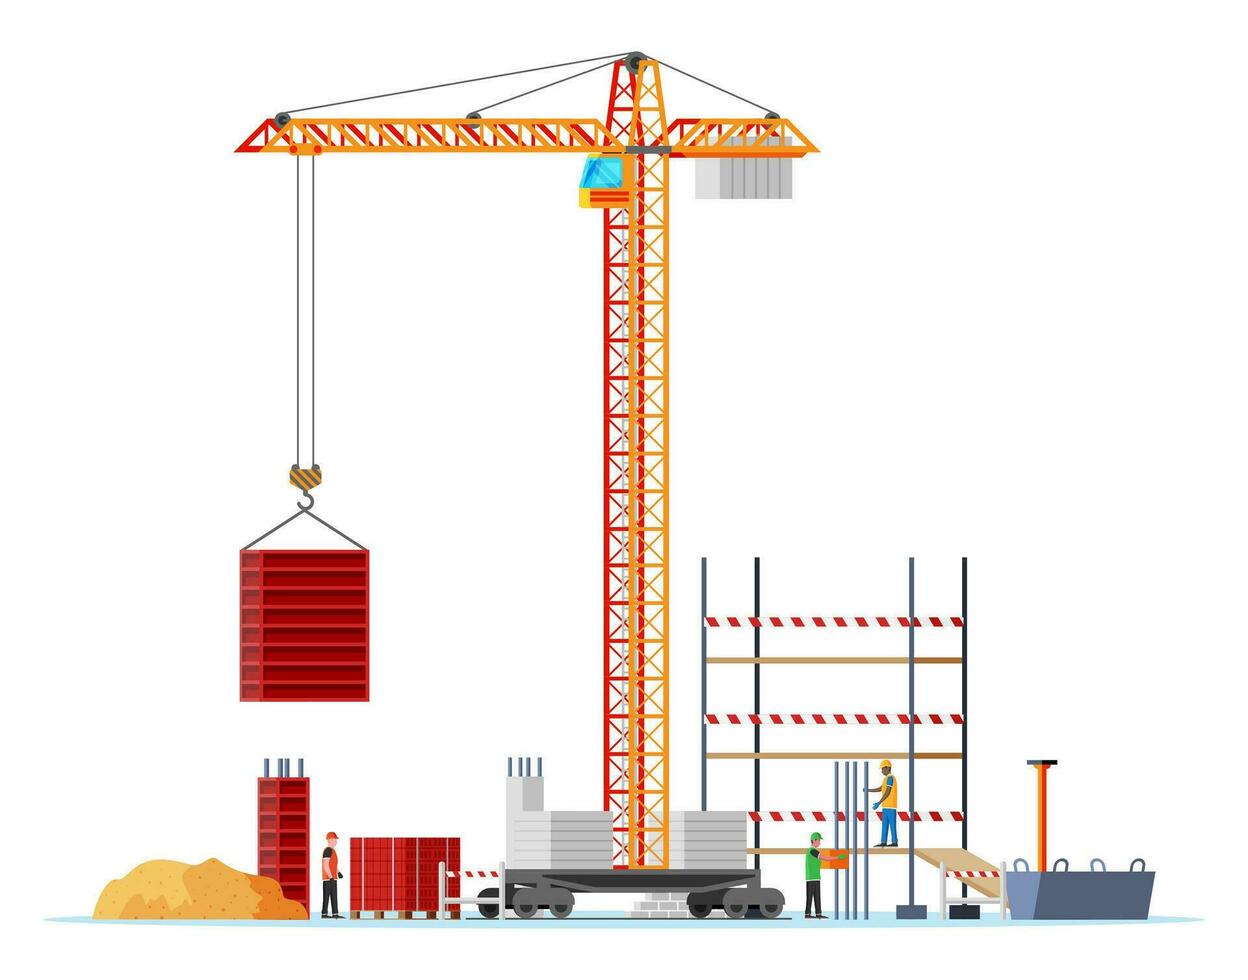 Construction Site Banner. Sand, Brick, Workers, Concrete Piles, Tower Crane. Under Construction Design Background. Building Materials and Equipment. Cartoon Flat Vector Illustration